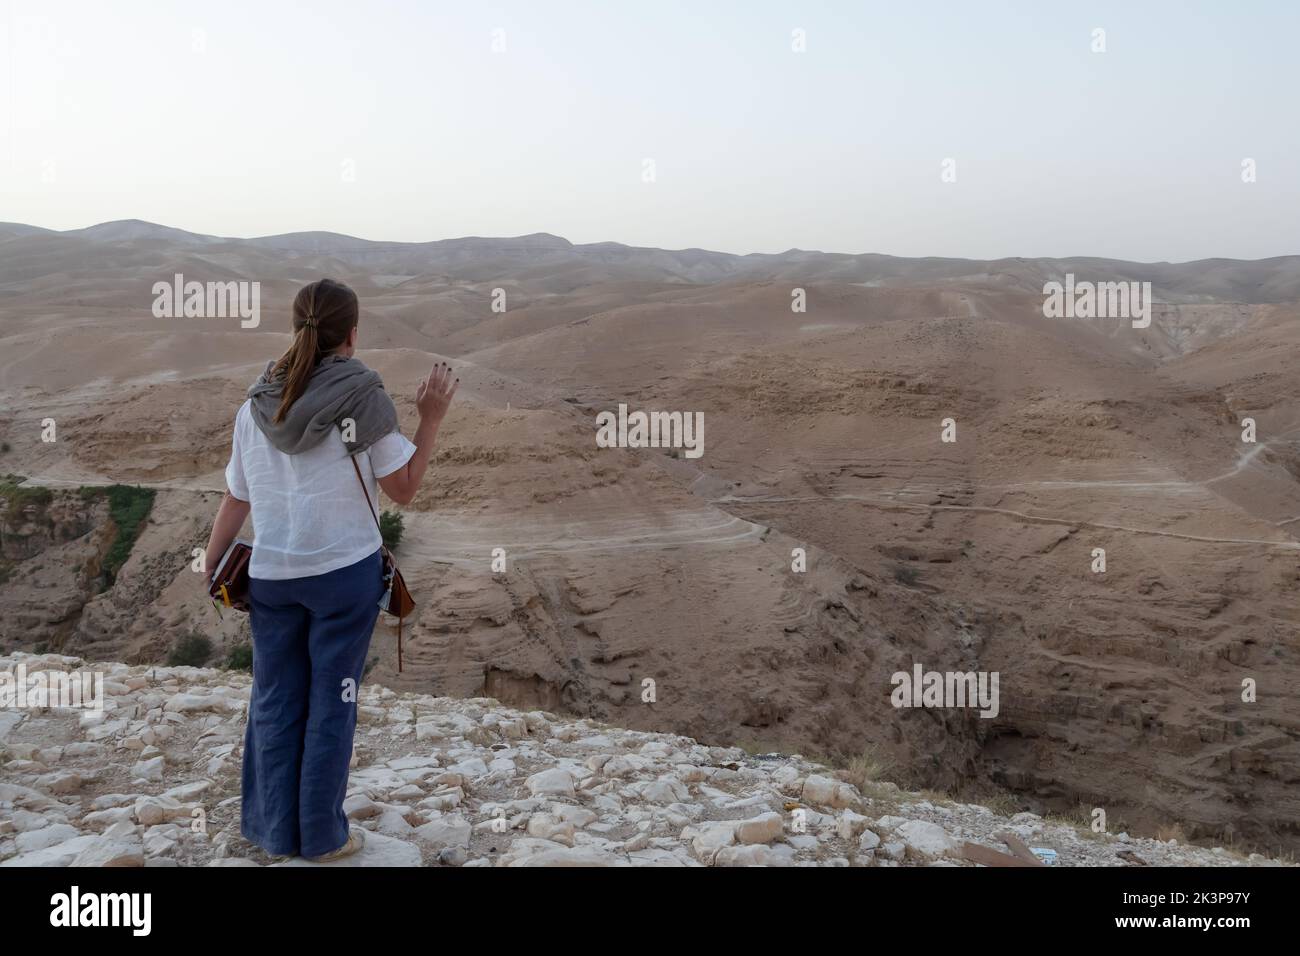 A Christian pilgrim prays as she stands on a cliff above the valley of the Wadi Qelt, located in the Judaean or Judean desert in Israel Stock Photo